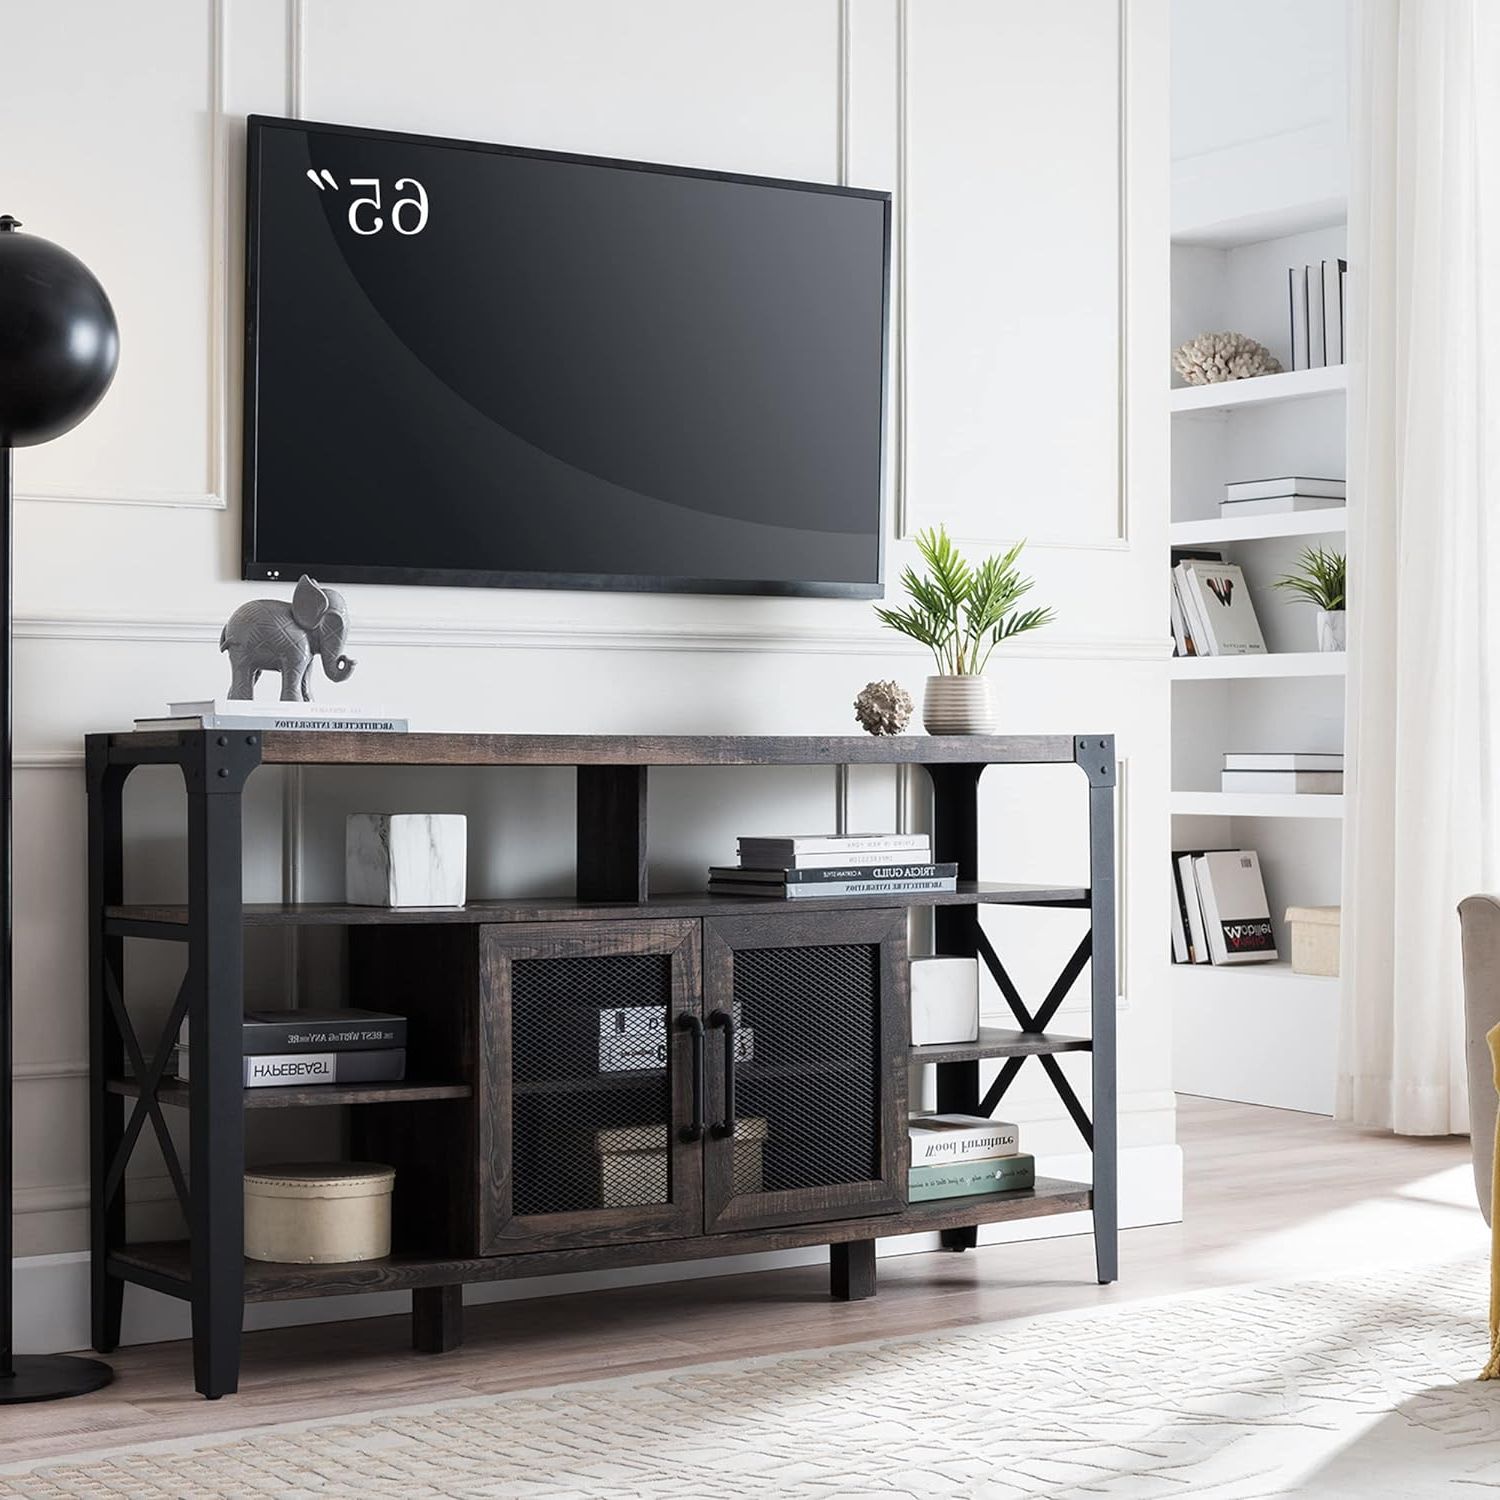 Okd Tv Stand Industrial Rustic Entertainment Center Italy | Ubuy Intended For Wide Entertainment Centers (View 6 of 20)